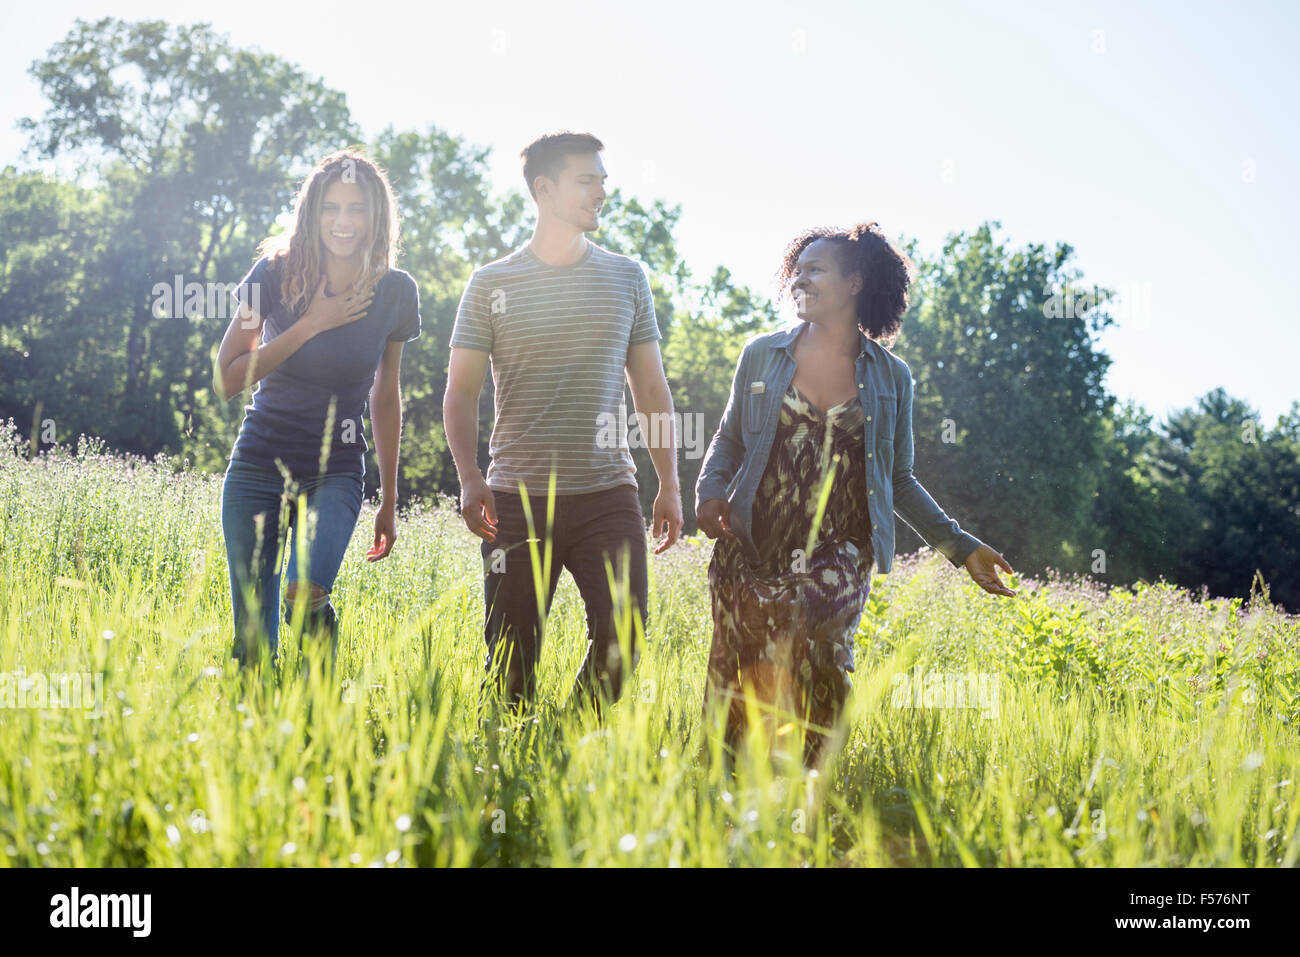 Three people, a man and two women walking through tall grass in a meadow. Stock Photo